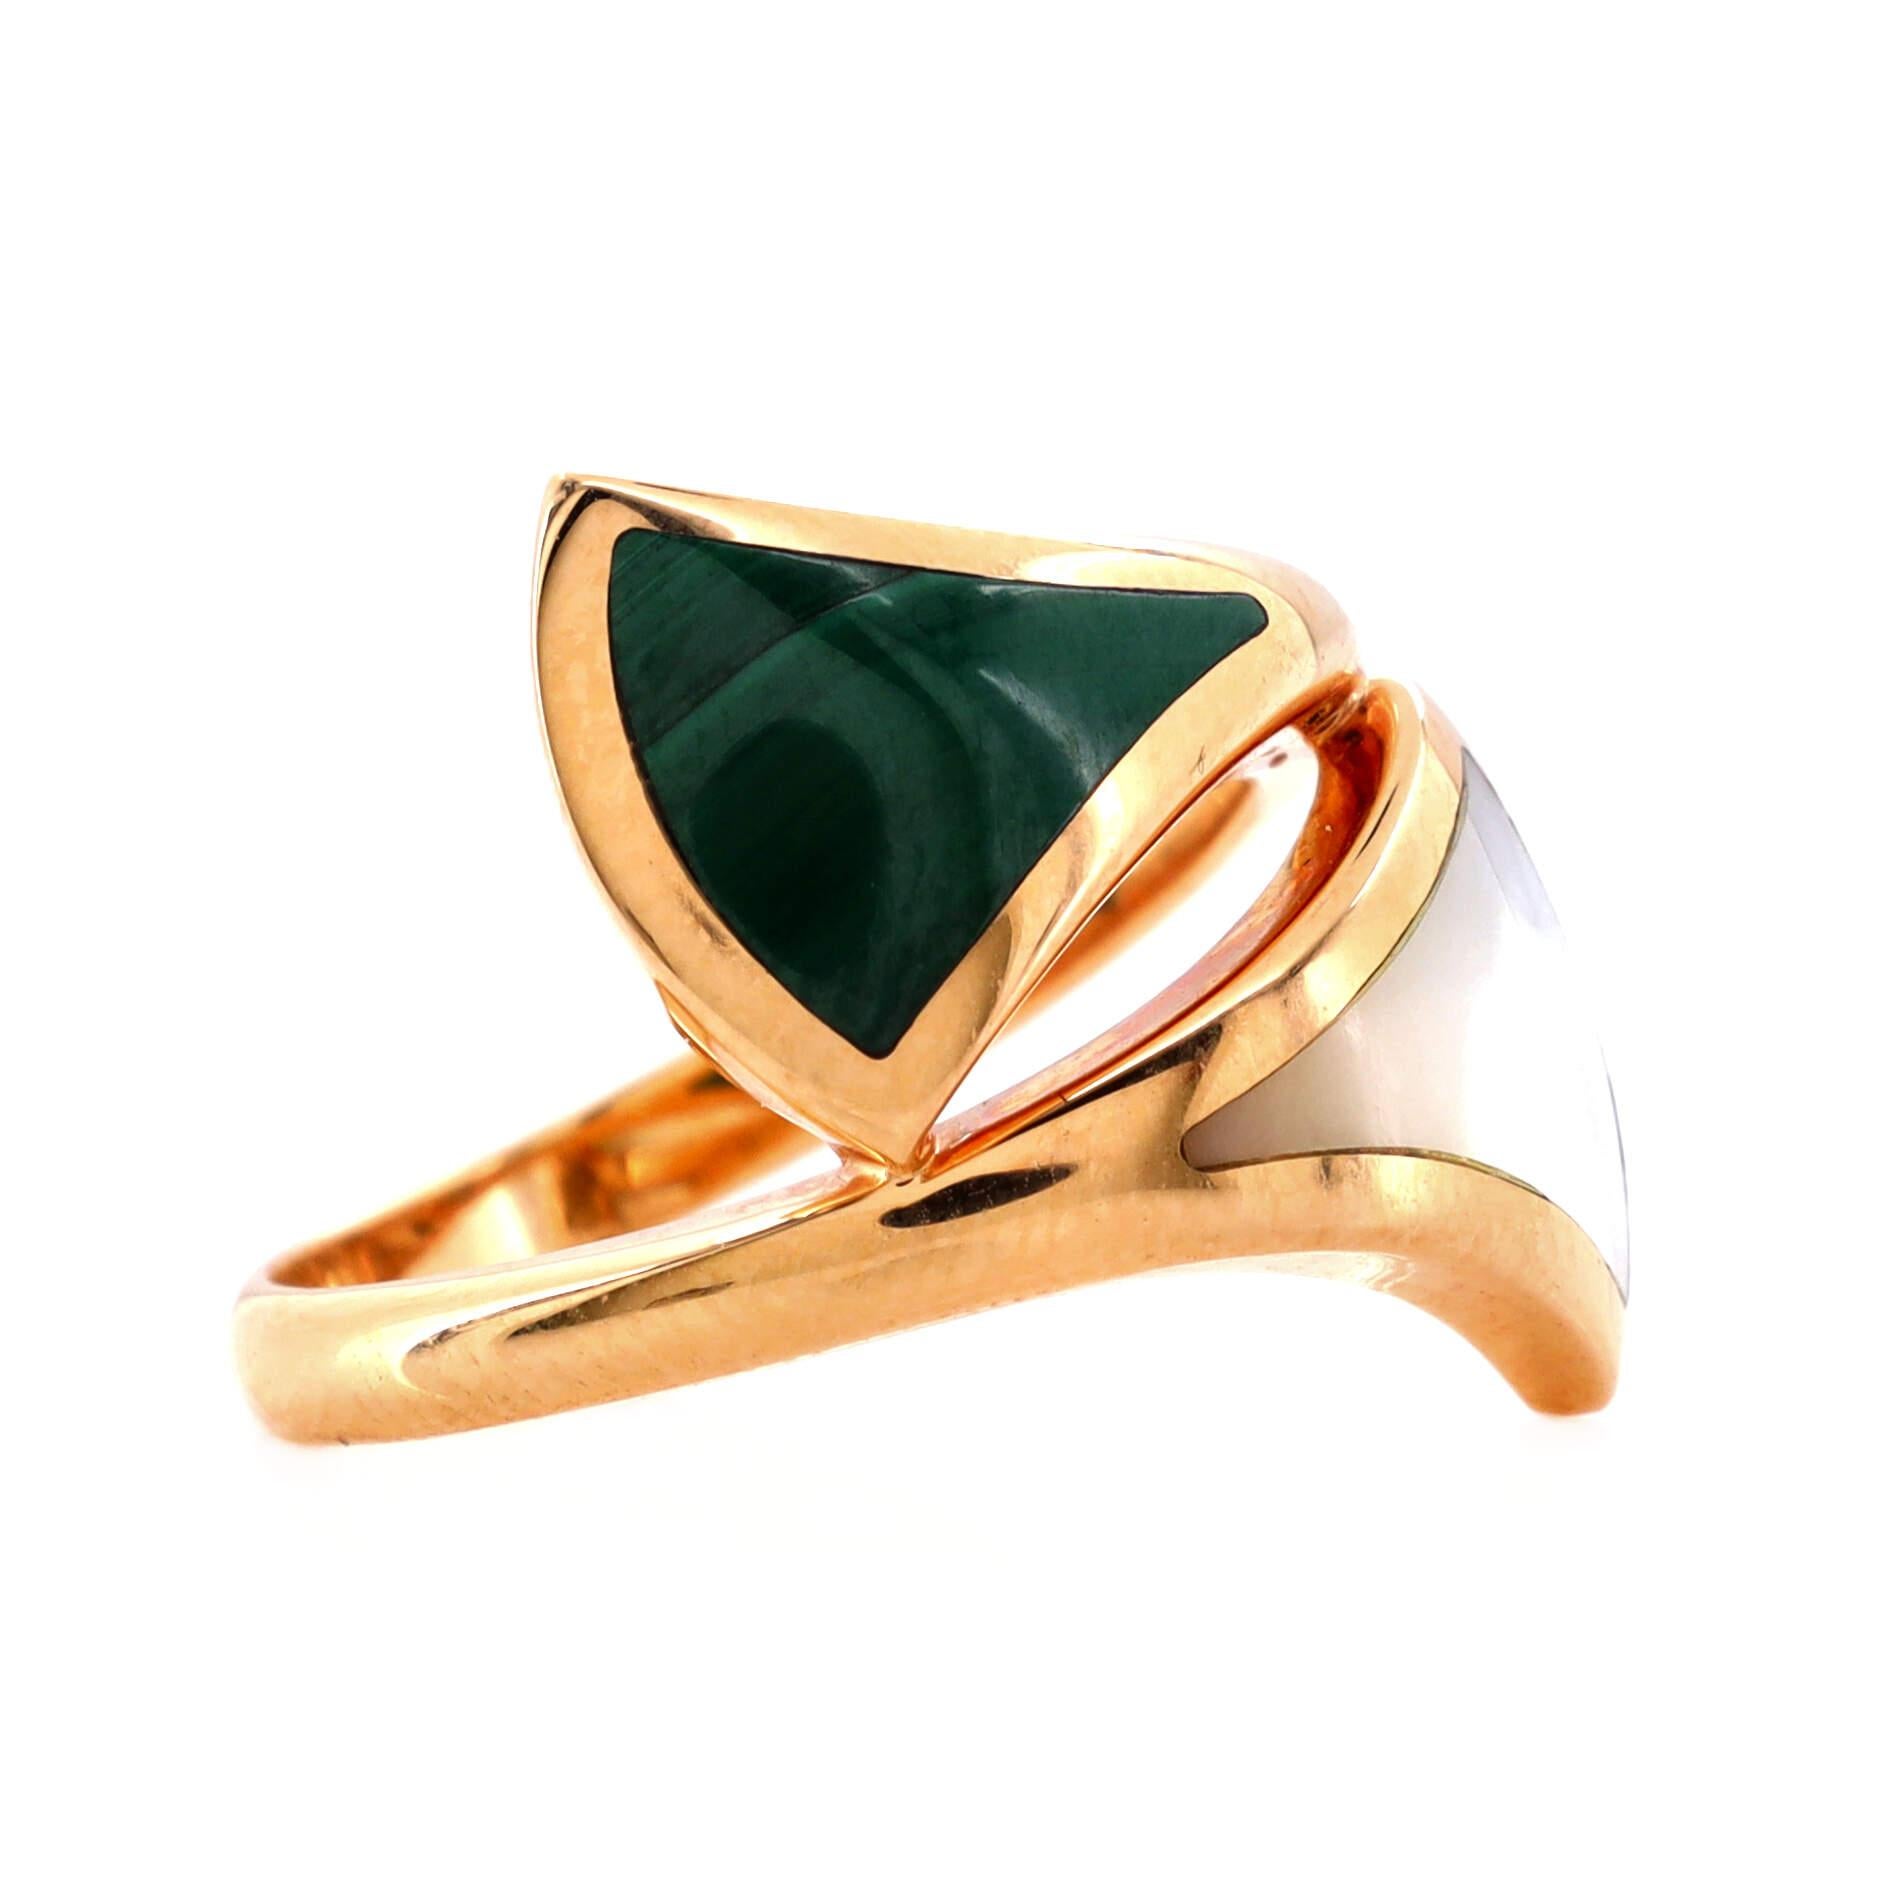 Condition: Outlet. Moderate wear with repaired malachite stone.
Accessories: No Accessories
Measurements: Width: 13 mm
Designer: Bvlgari
Model: Divas' Dream Ring 18K Rose Gold with Malachite and Mother of Pearl Large
Exterior Color: Rose Gold
Item